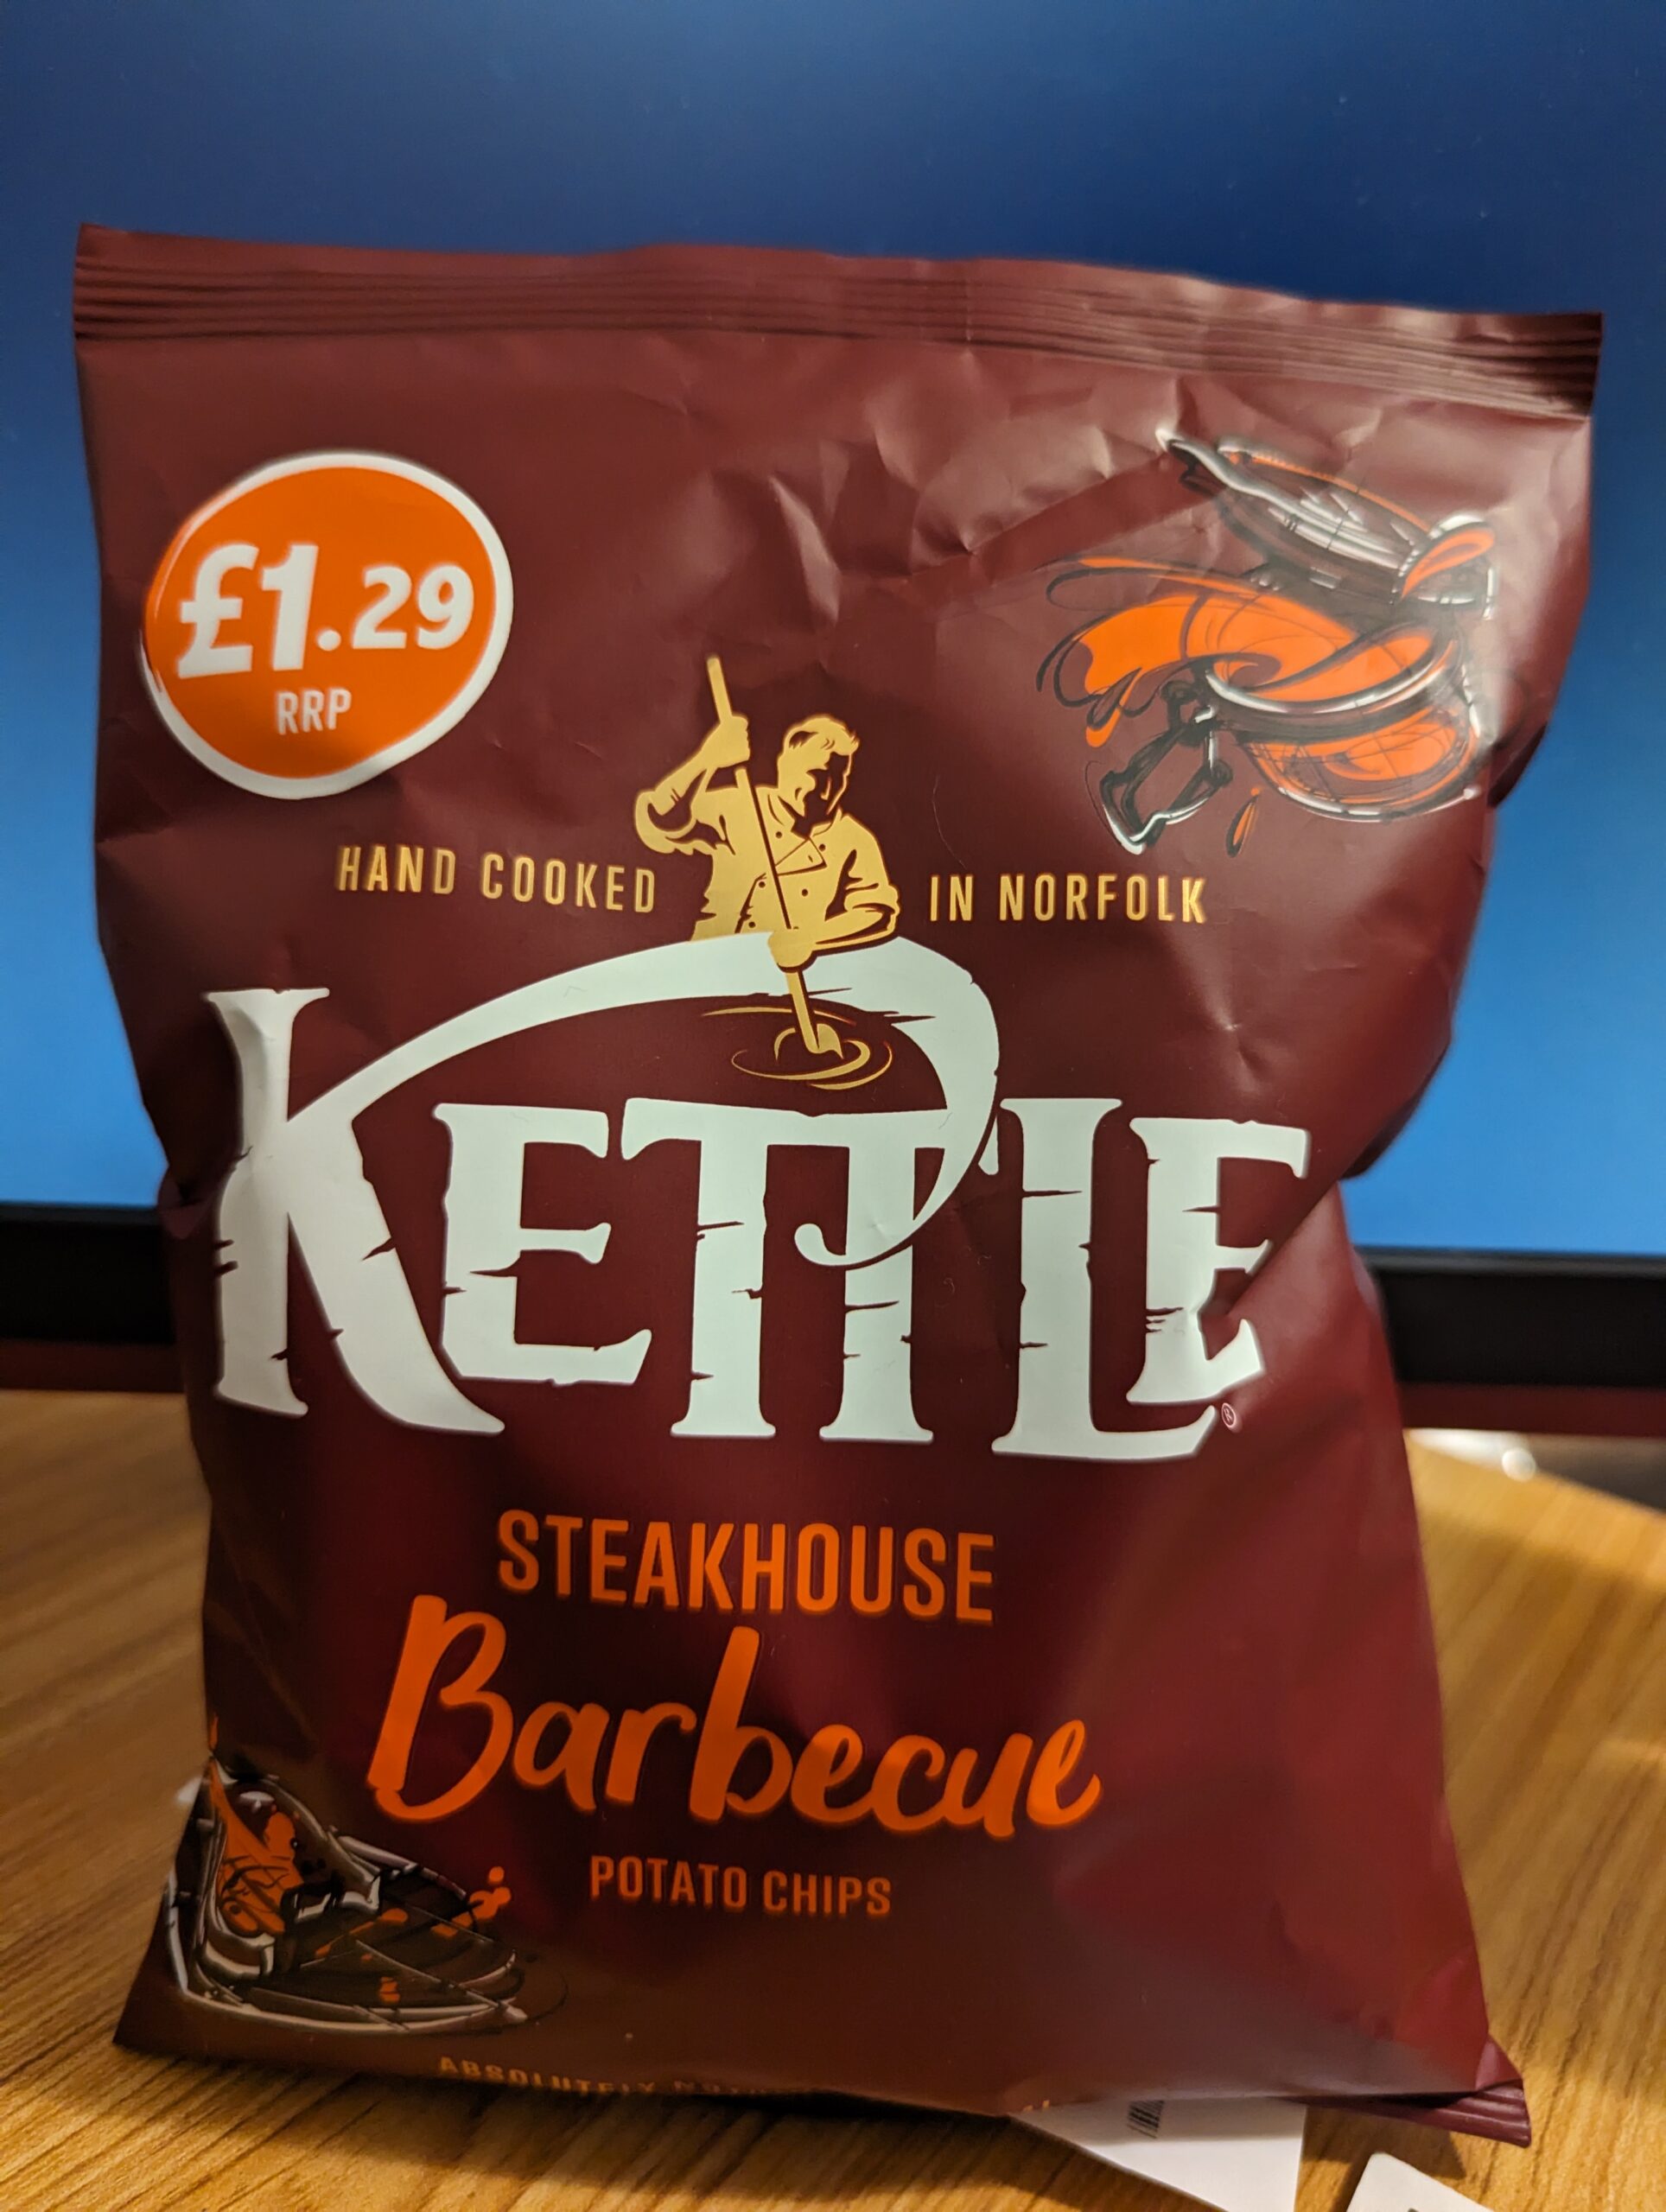 Kettle Steakhouse Barbecue